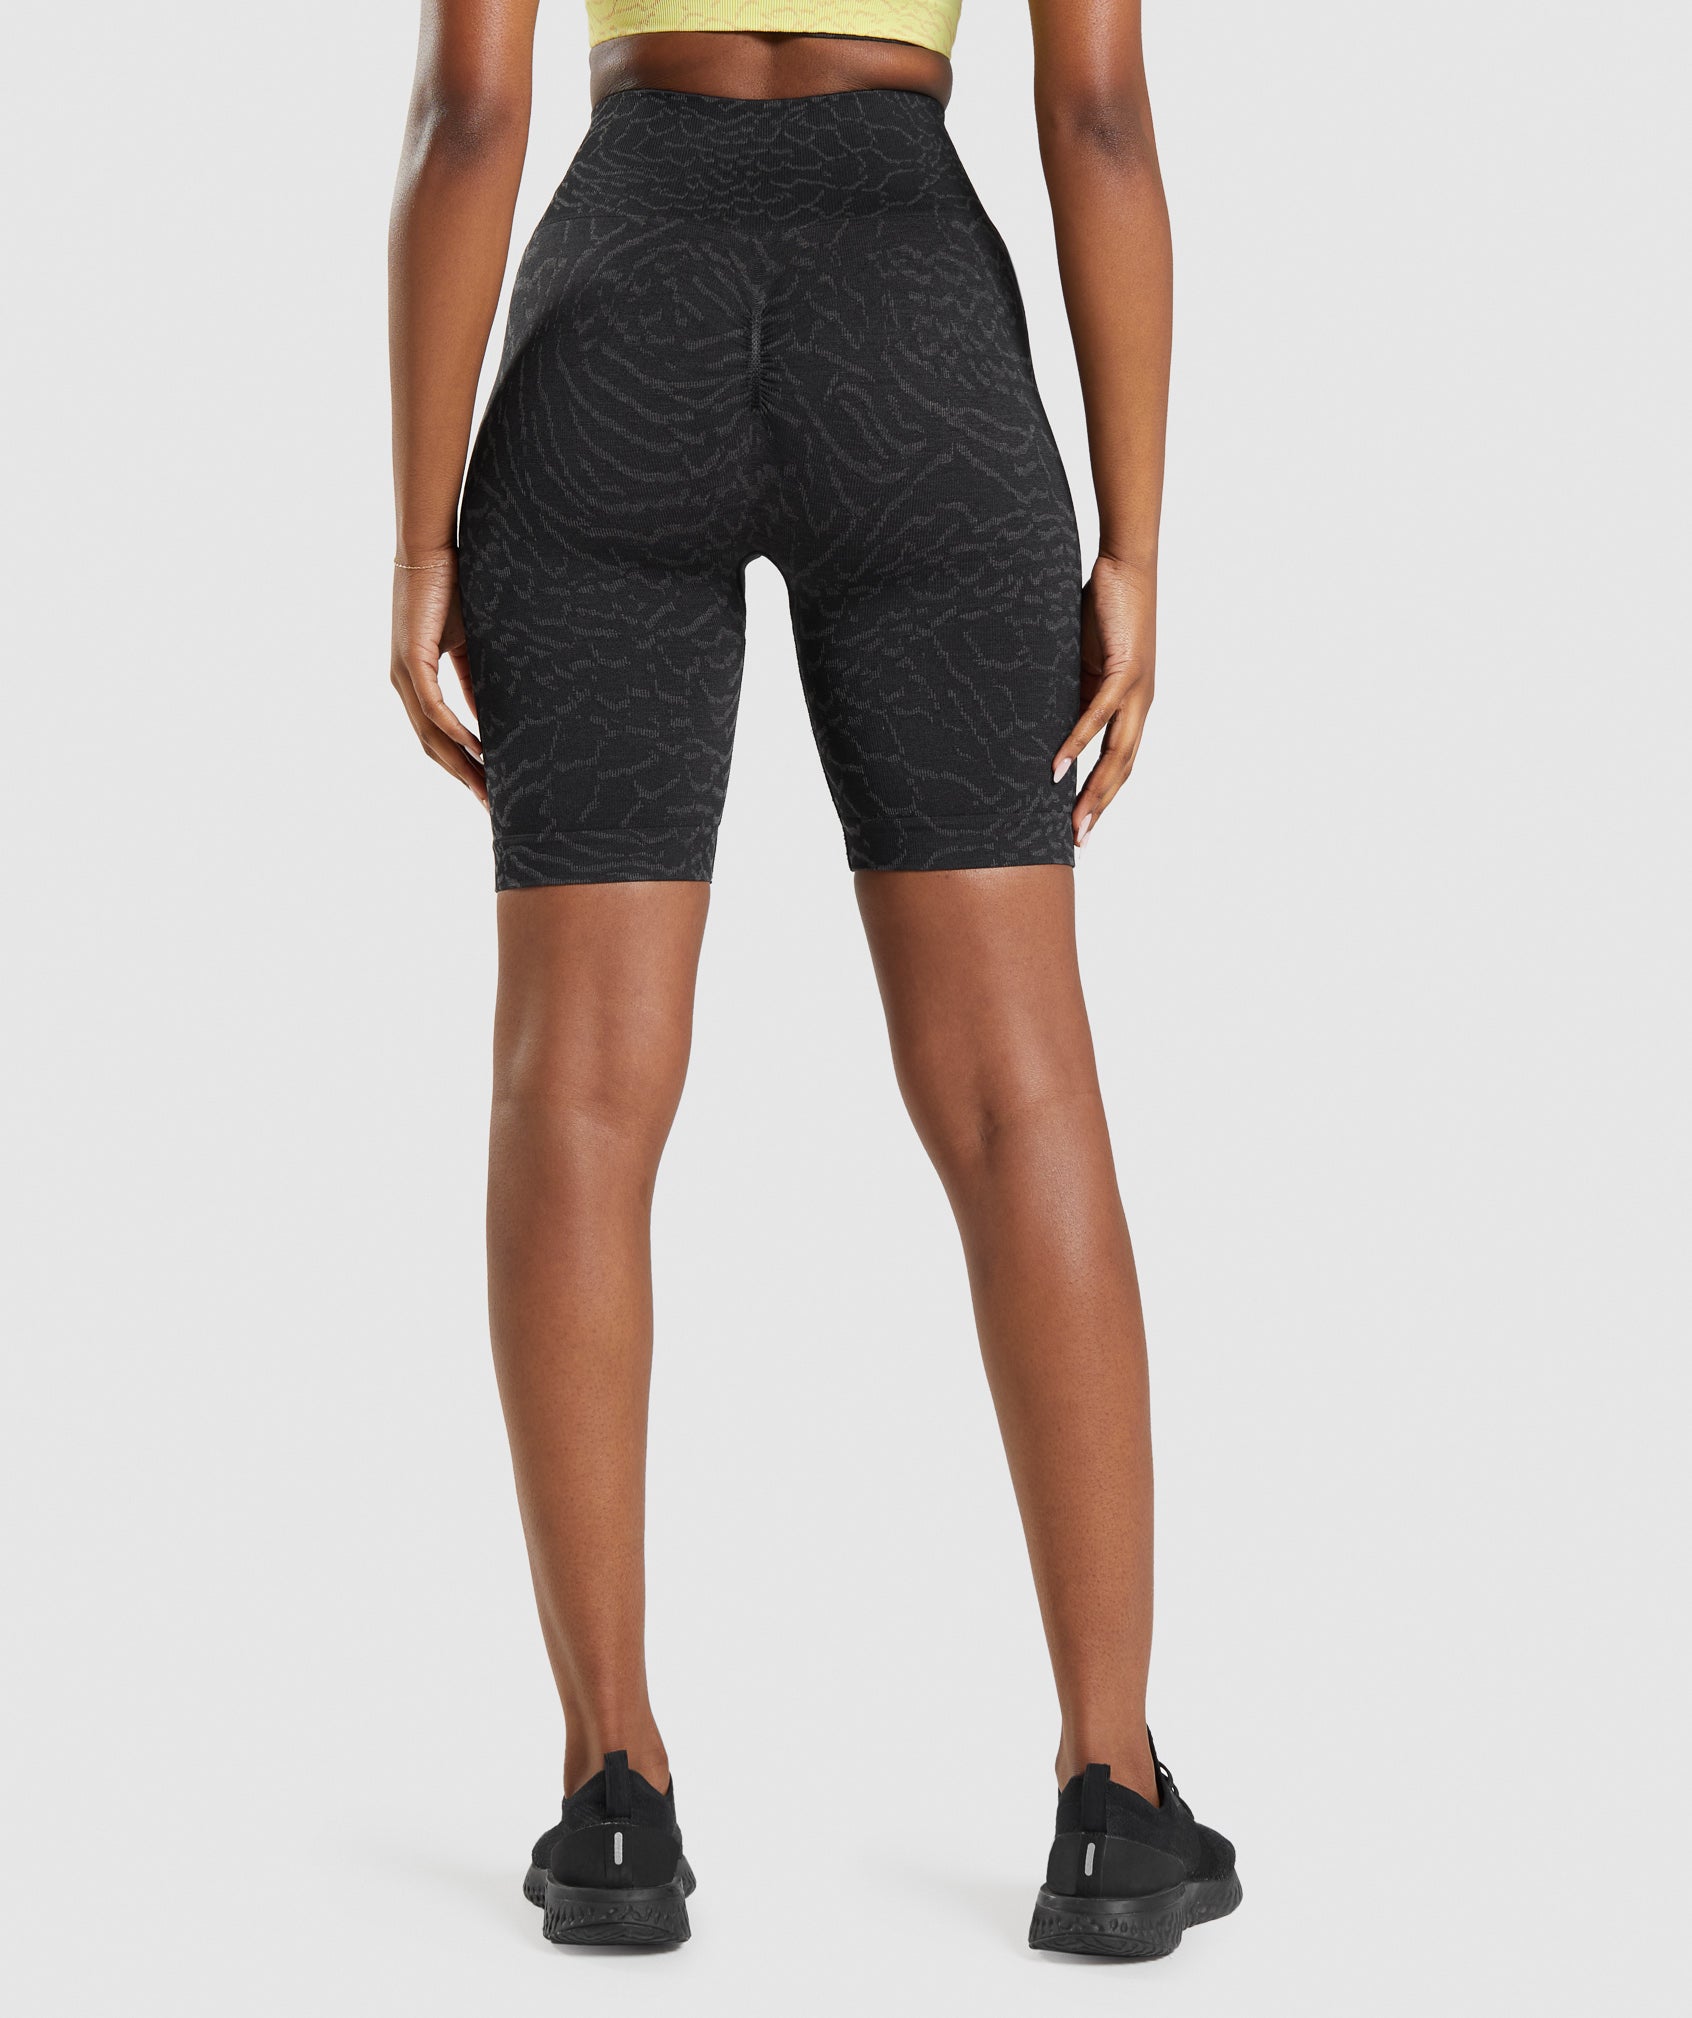 Adapt Animal Seamless Cycling Shorts in Black - view 3